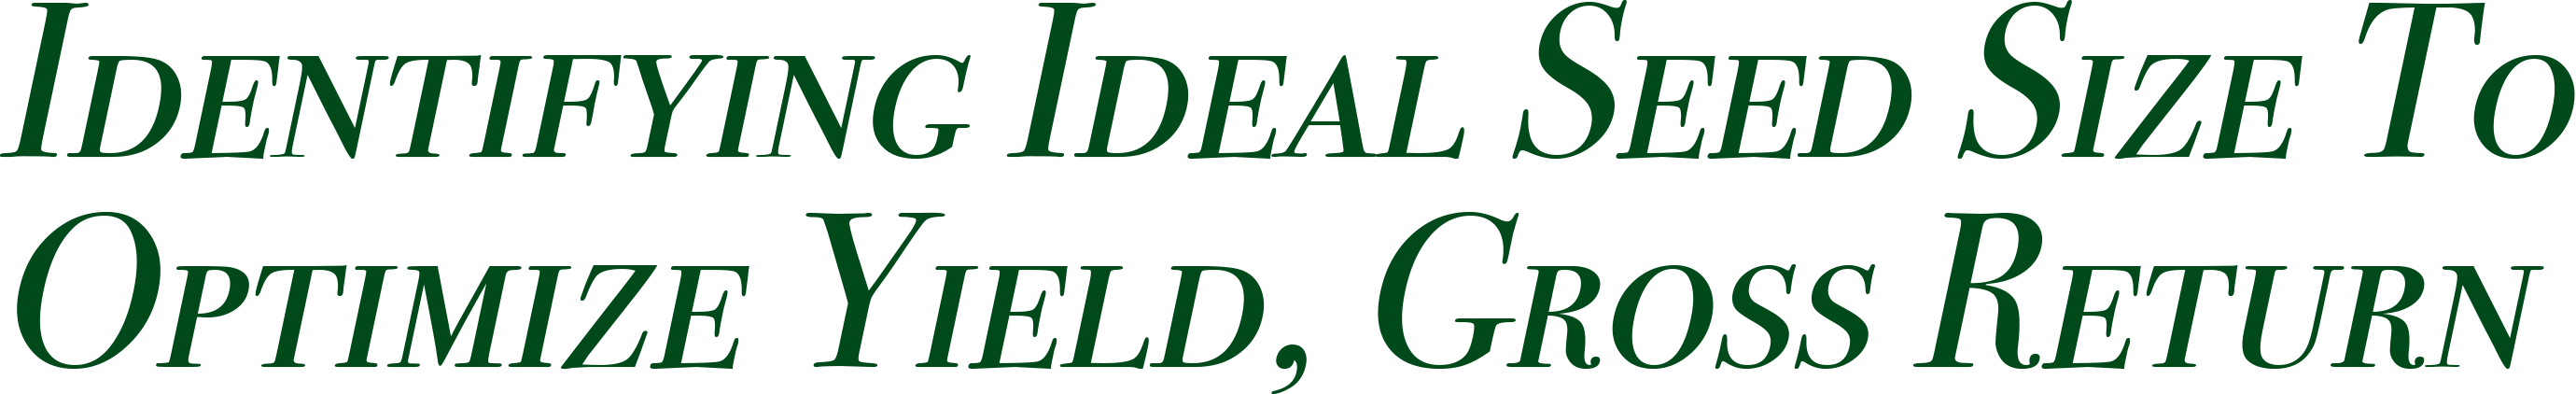 "Identifying Ideal Seed Size To Optimize Yield, Gross Return" in green serif font